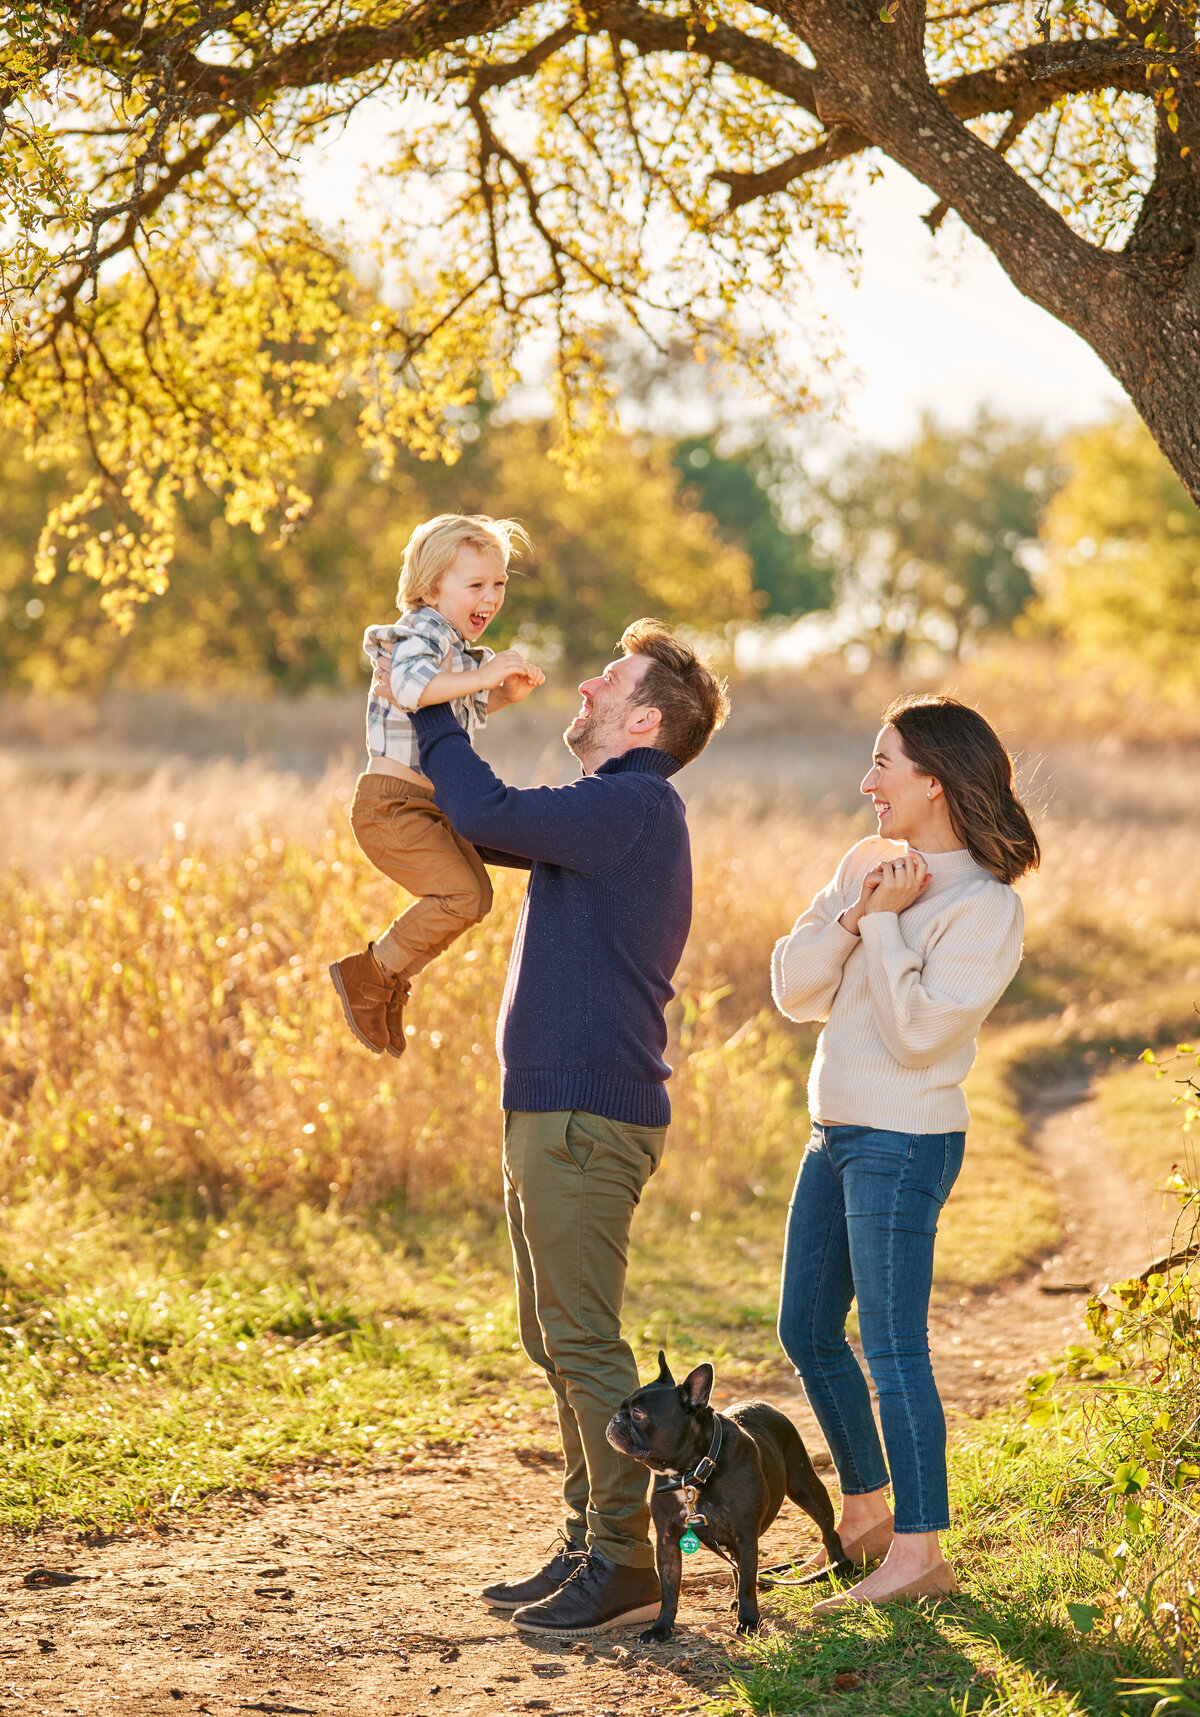 Fun family photography at Erwin Park in McKinney Texas